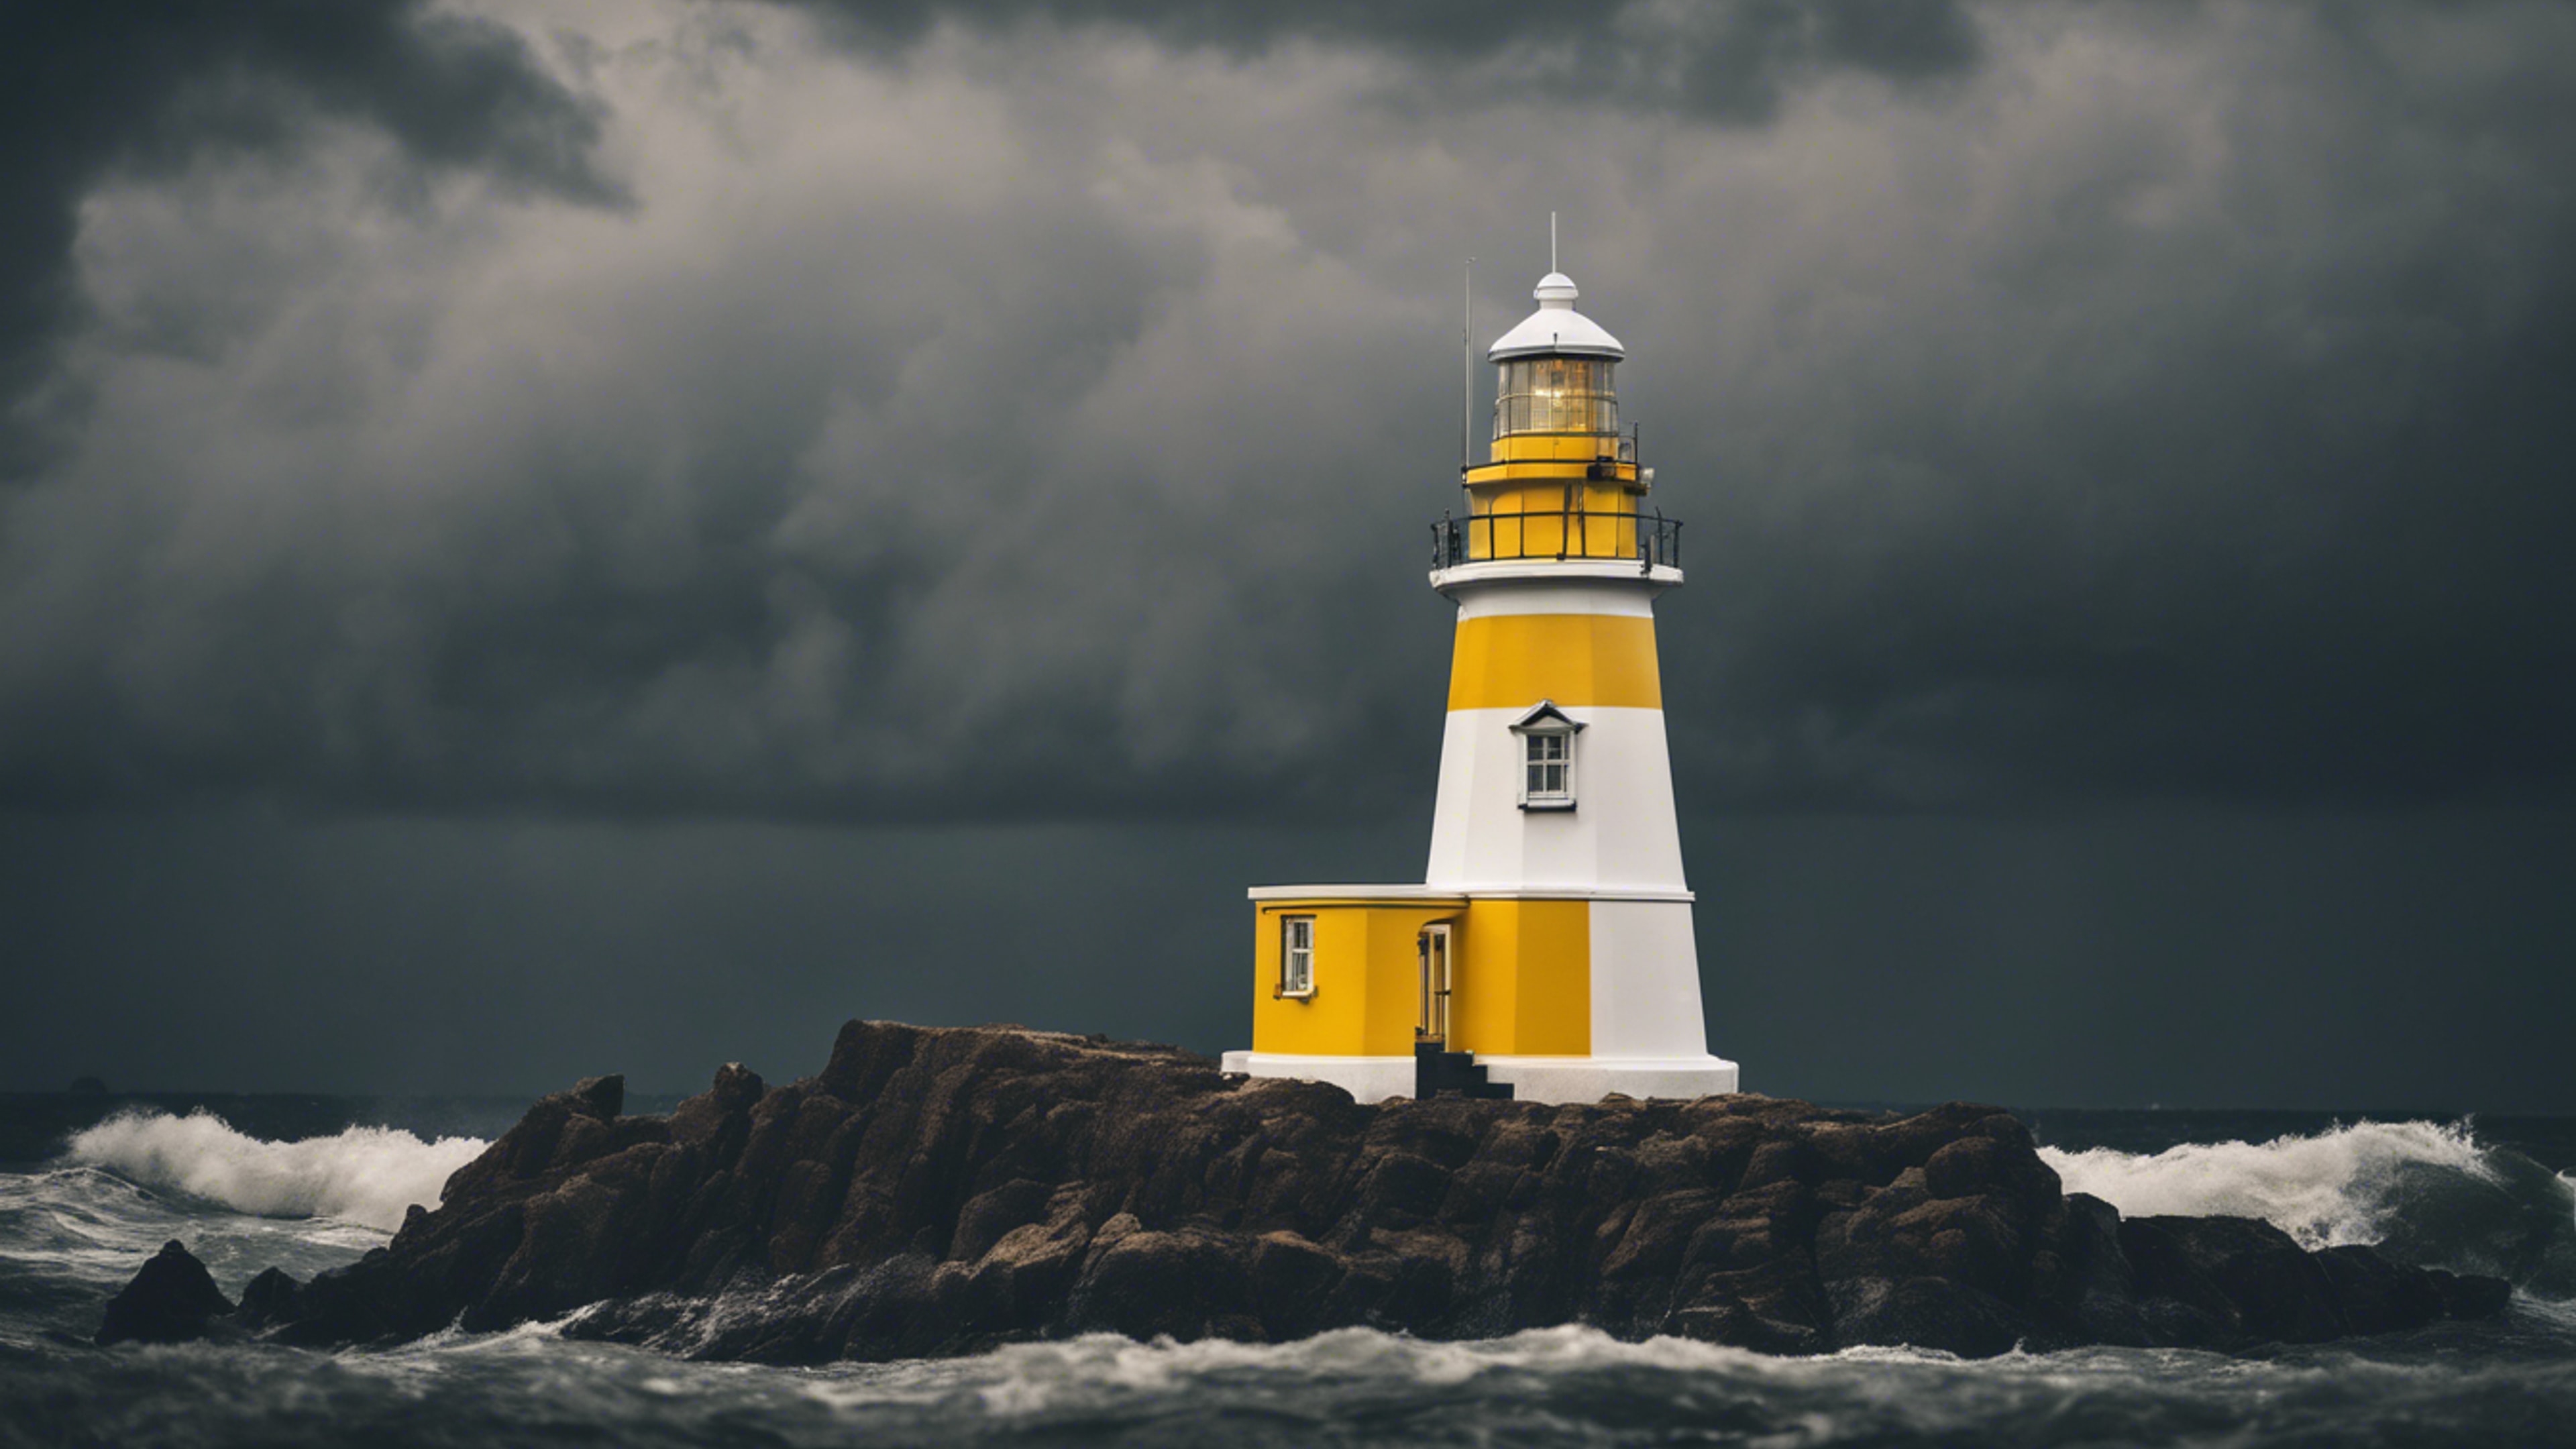 A white and yellow striped lighthouse standing tall against a stormy dark sky. วอลล์เปเปอร์[29fc73b96f634852baf9]